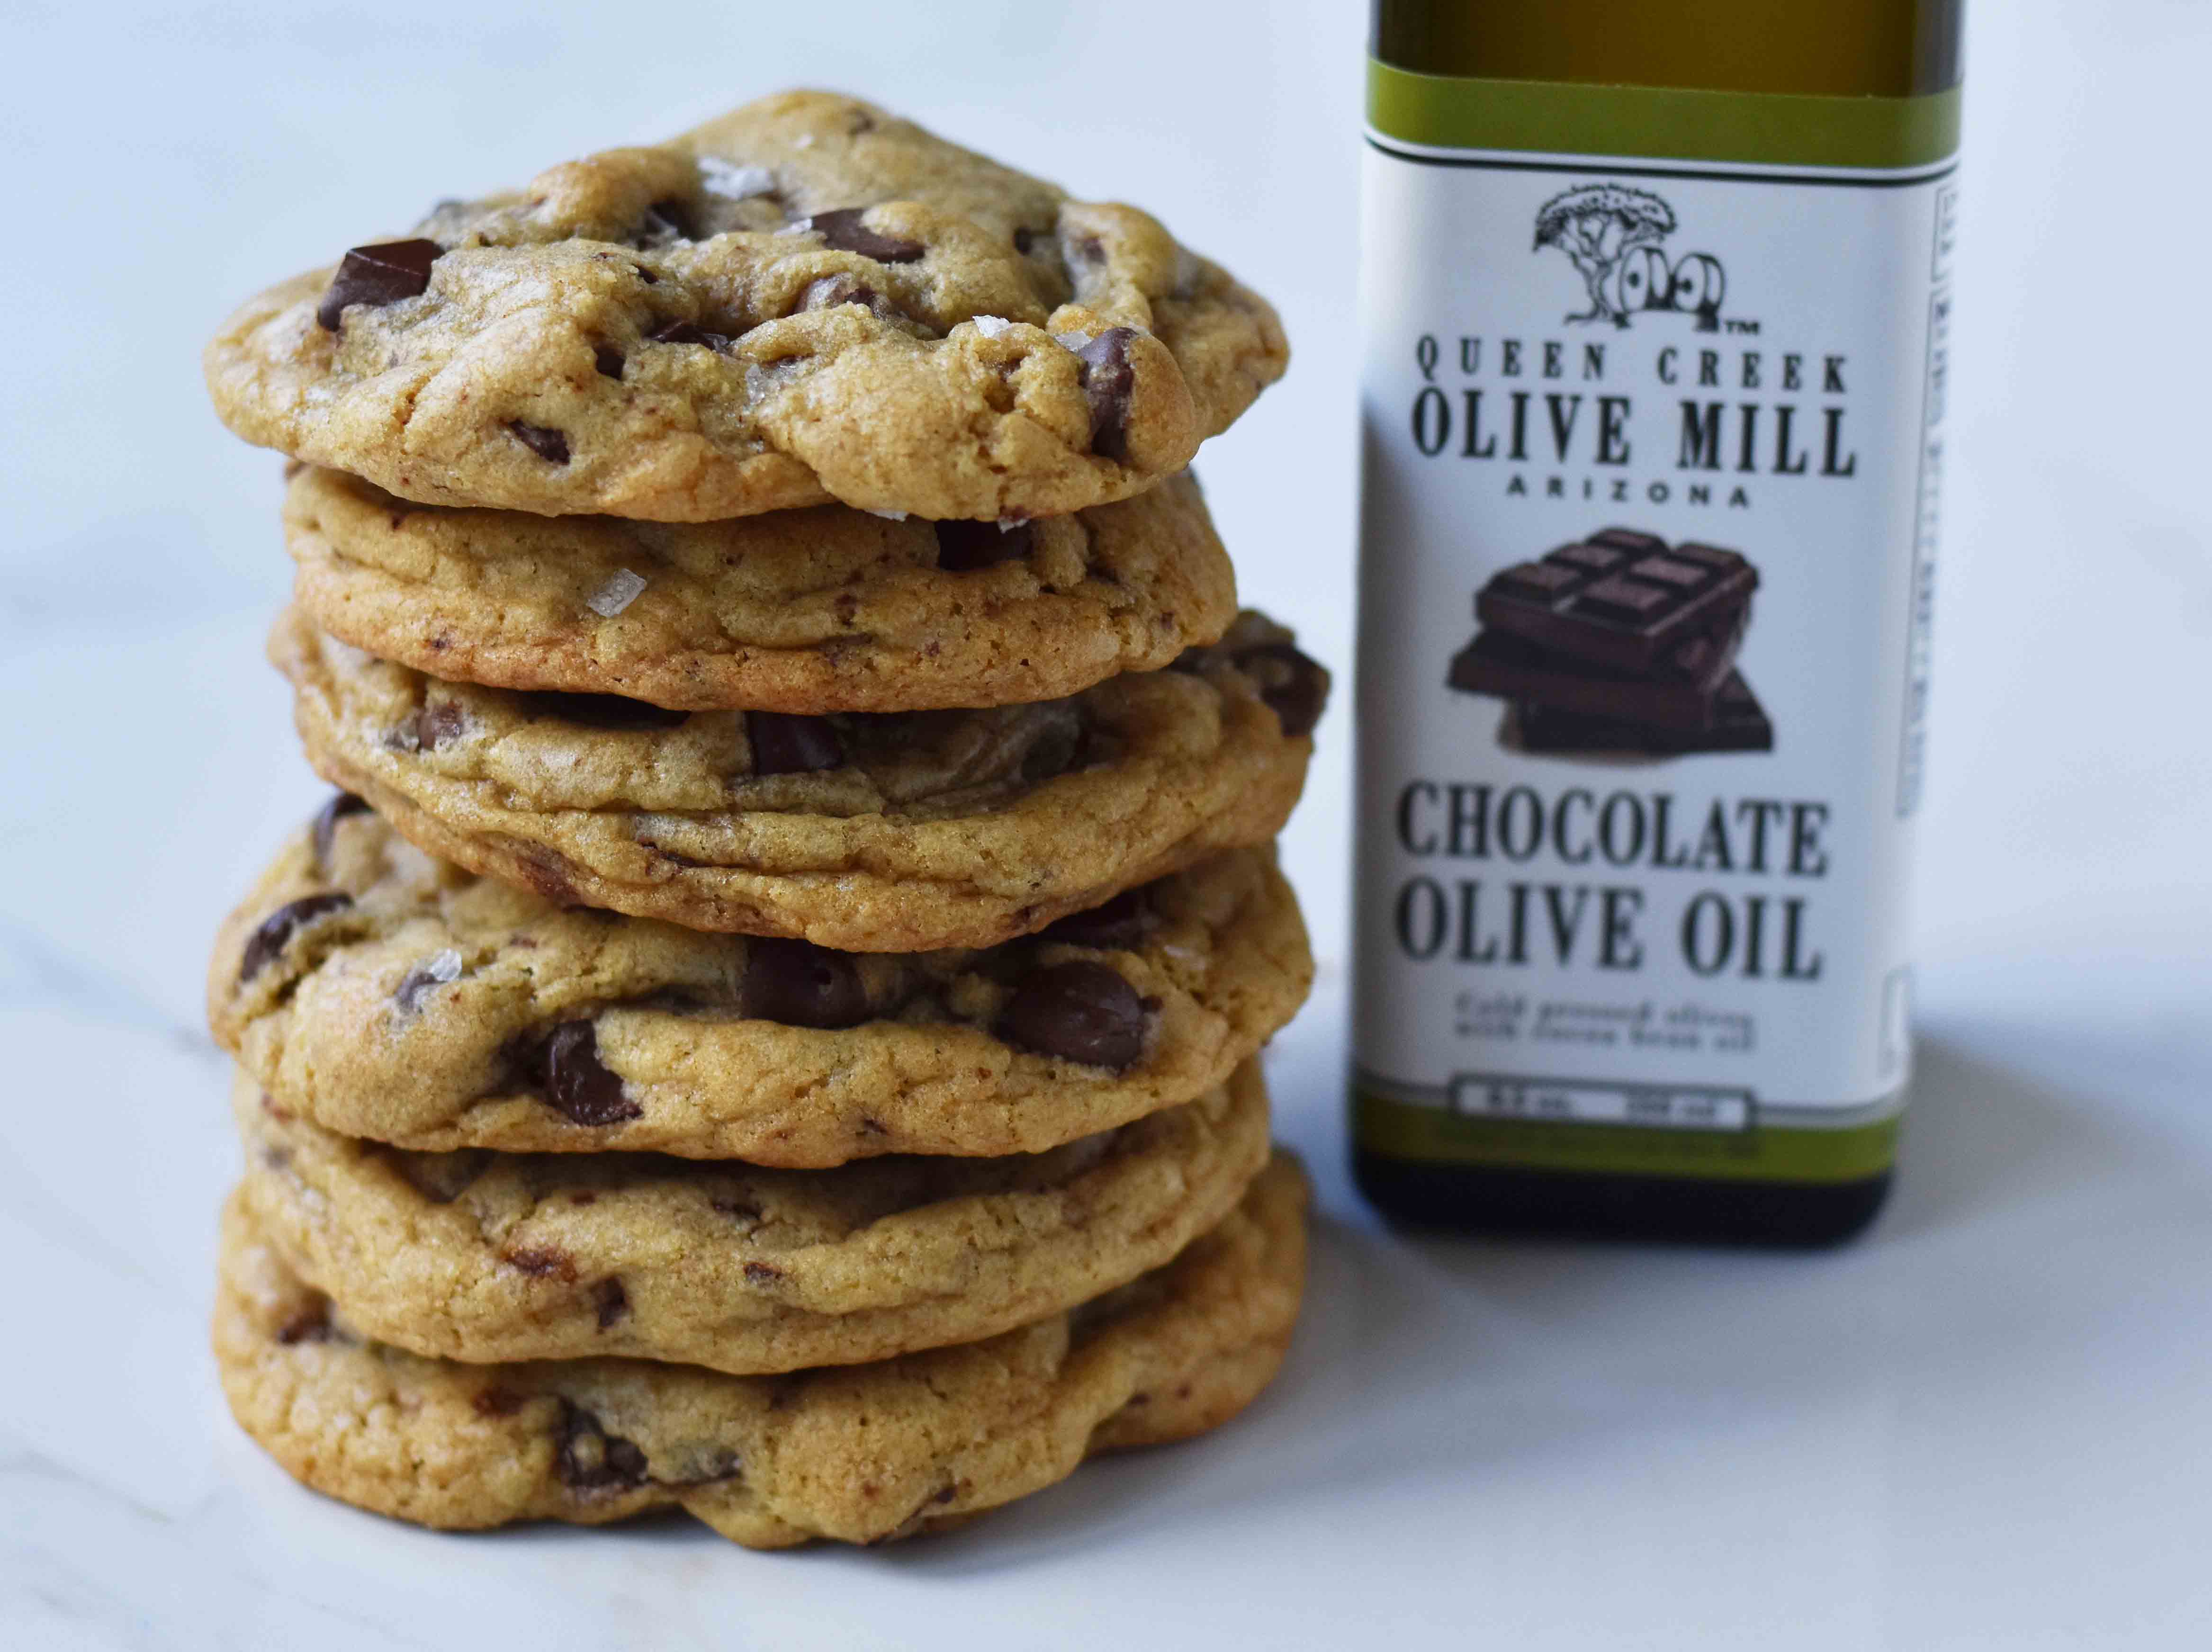 Dark Chocolate Chunk Olive Oil Cookies. Chewy and crispy chocolate chip cookies made with olive oil and butter. The perfect chocolate chip cookie with oil. www.modernhoney.com